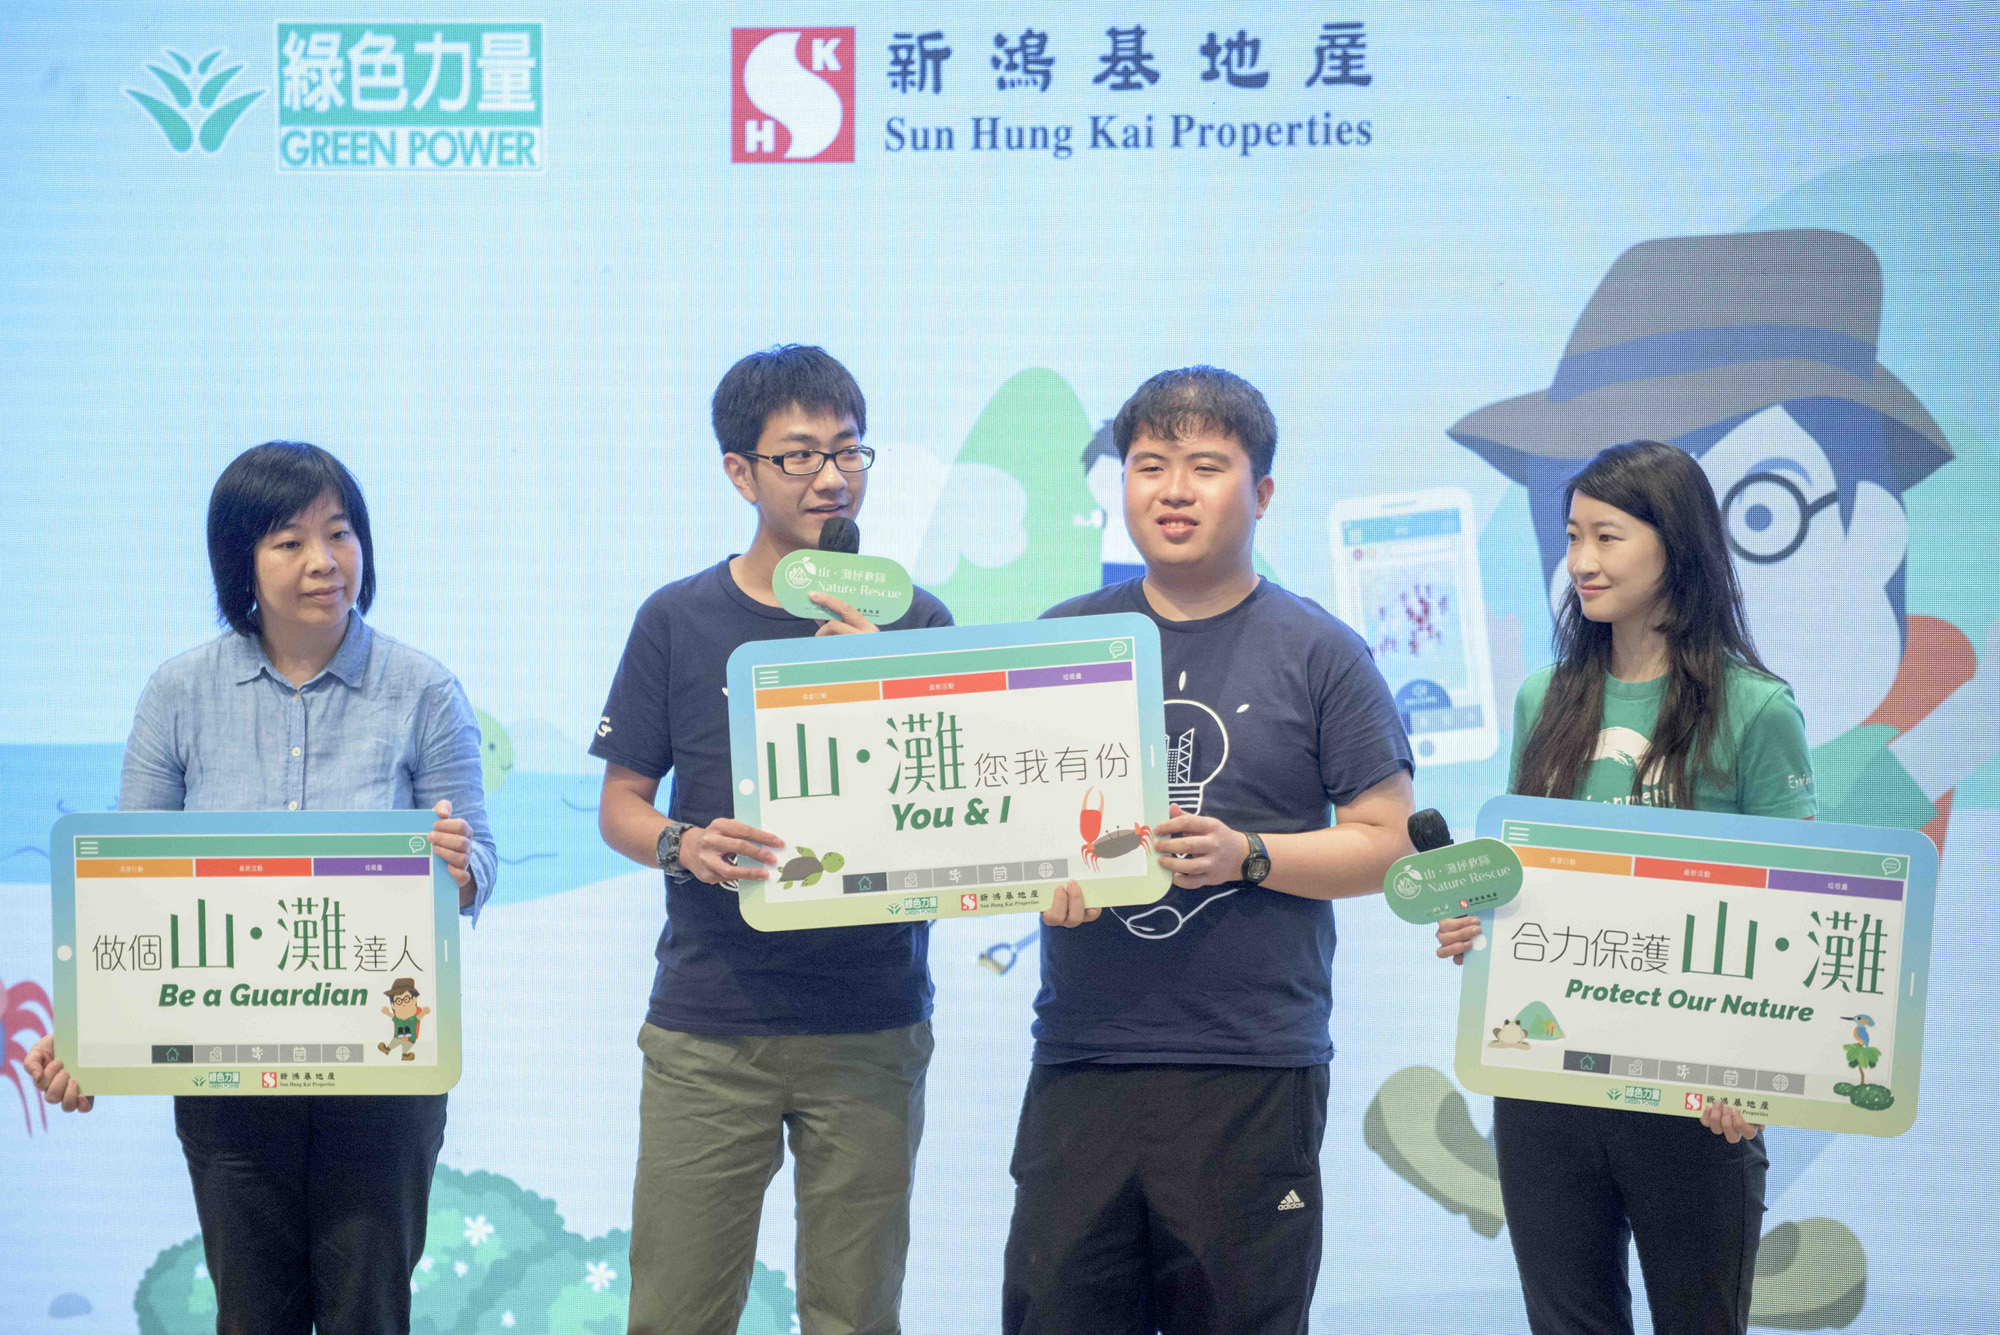 CIE experiences Hong Kong's First Countryside and Beach Clean-up Mobile App